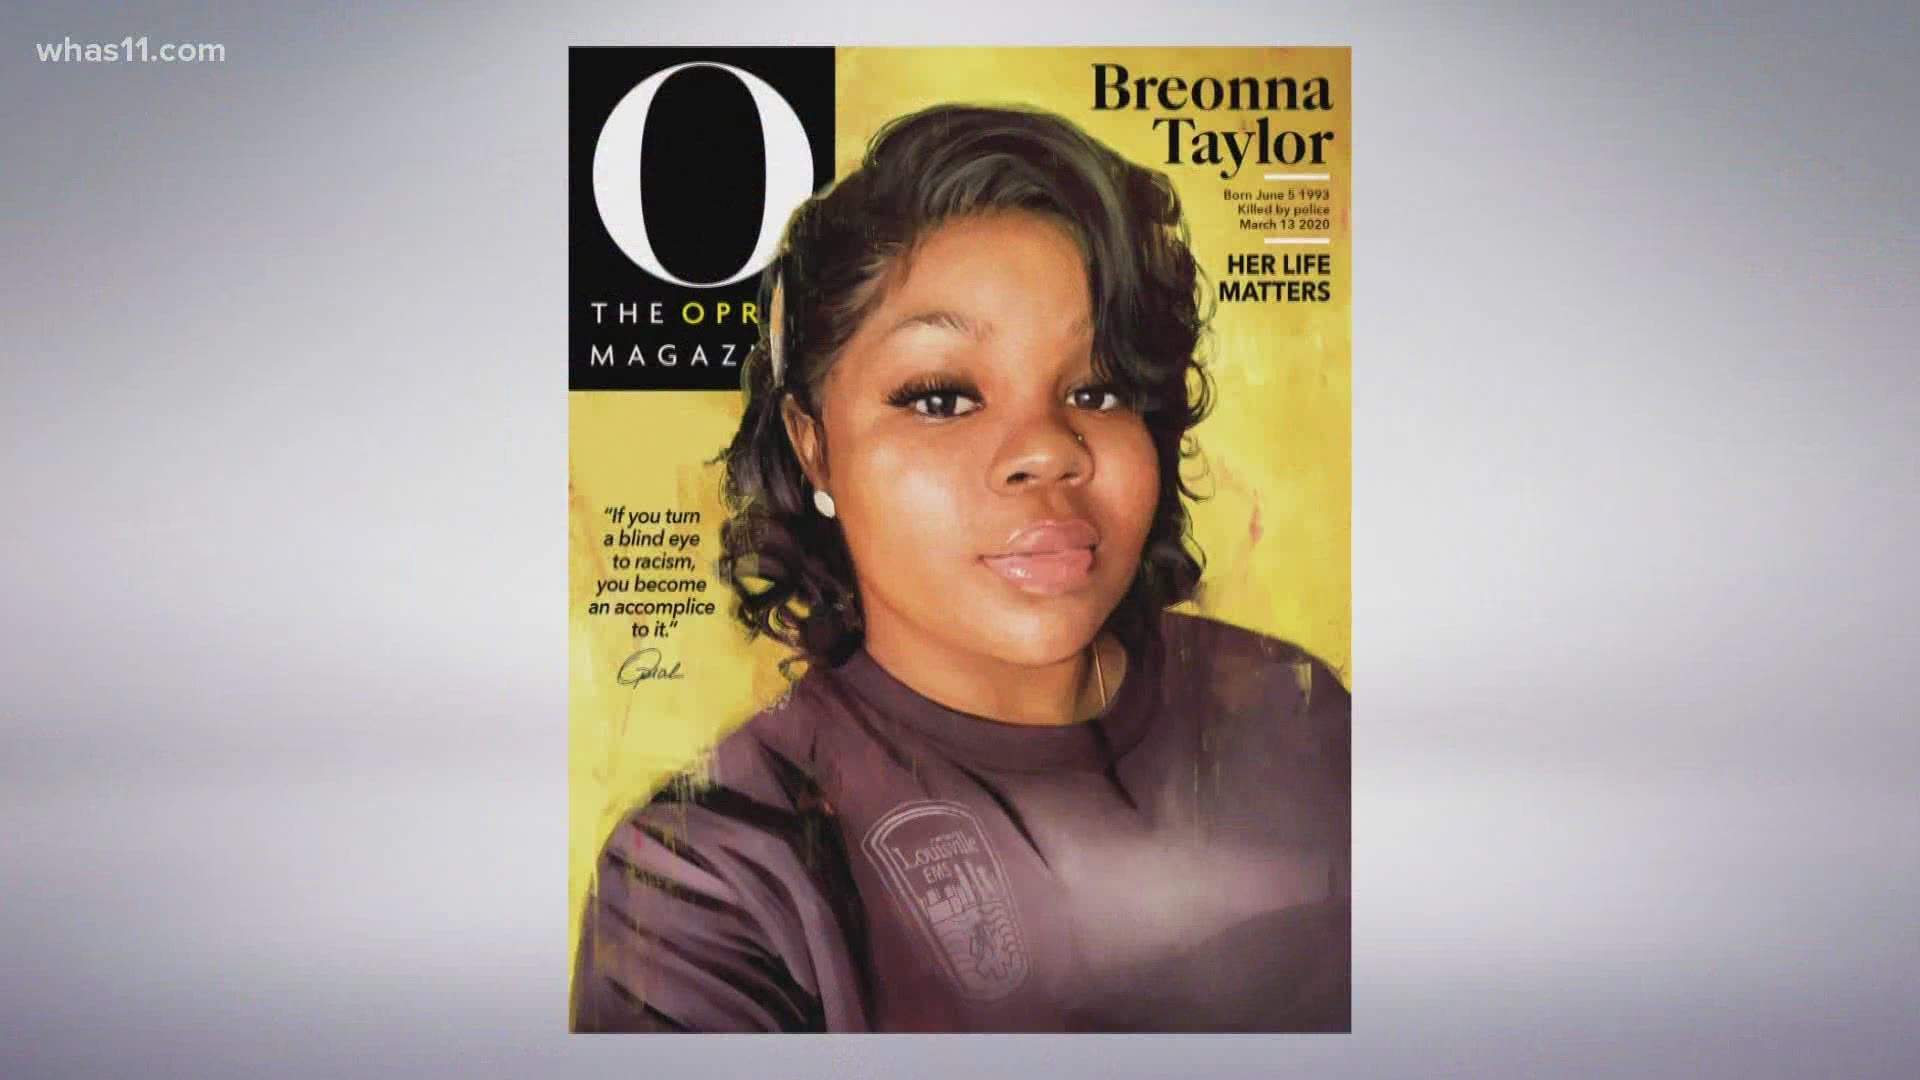 Oprah wrote an article, saying Breonna Taylor is just like her, just like us and like everyone who dies unexpectedly.